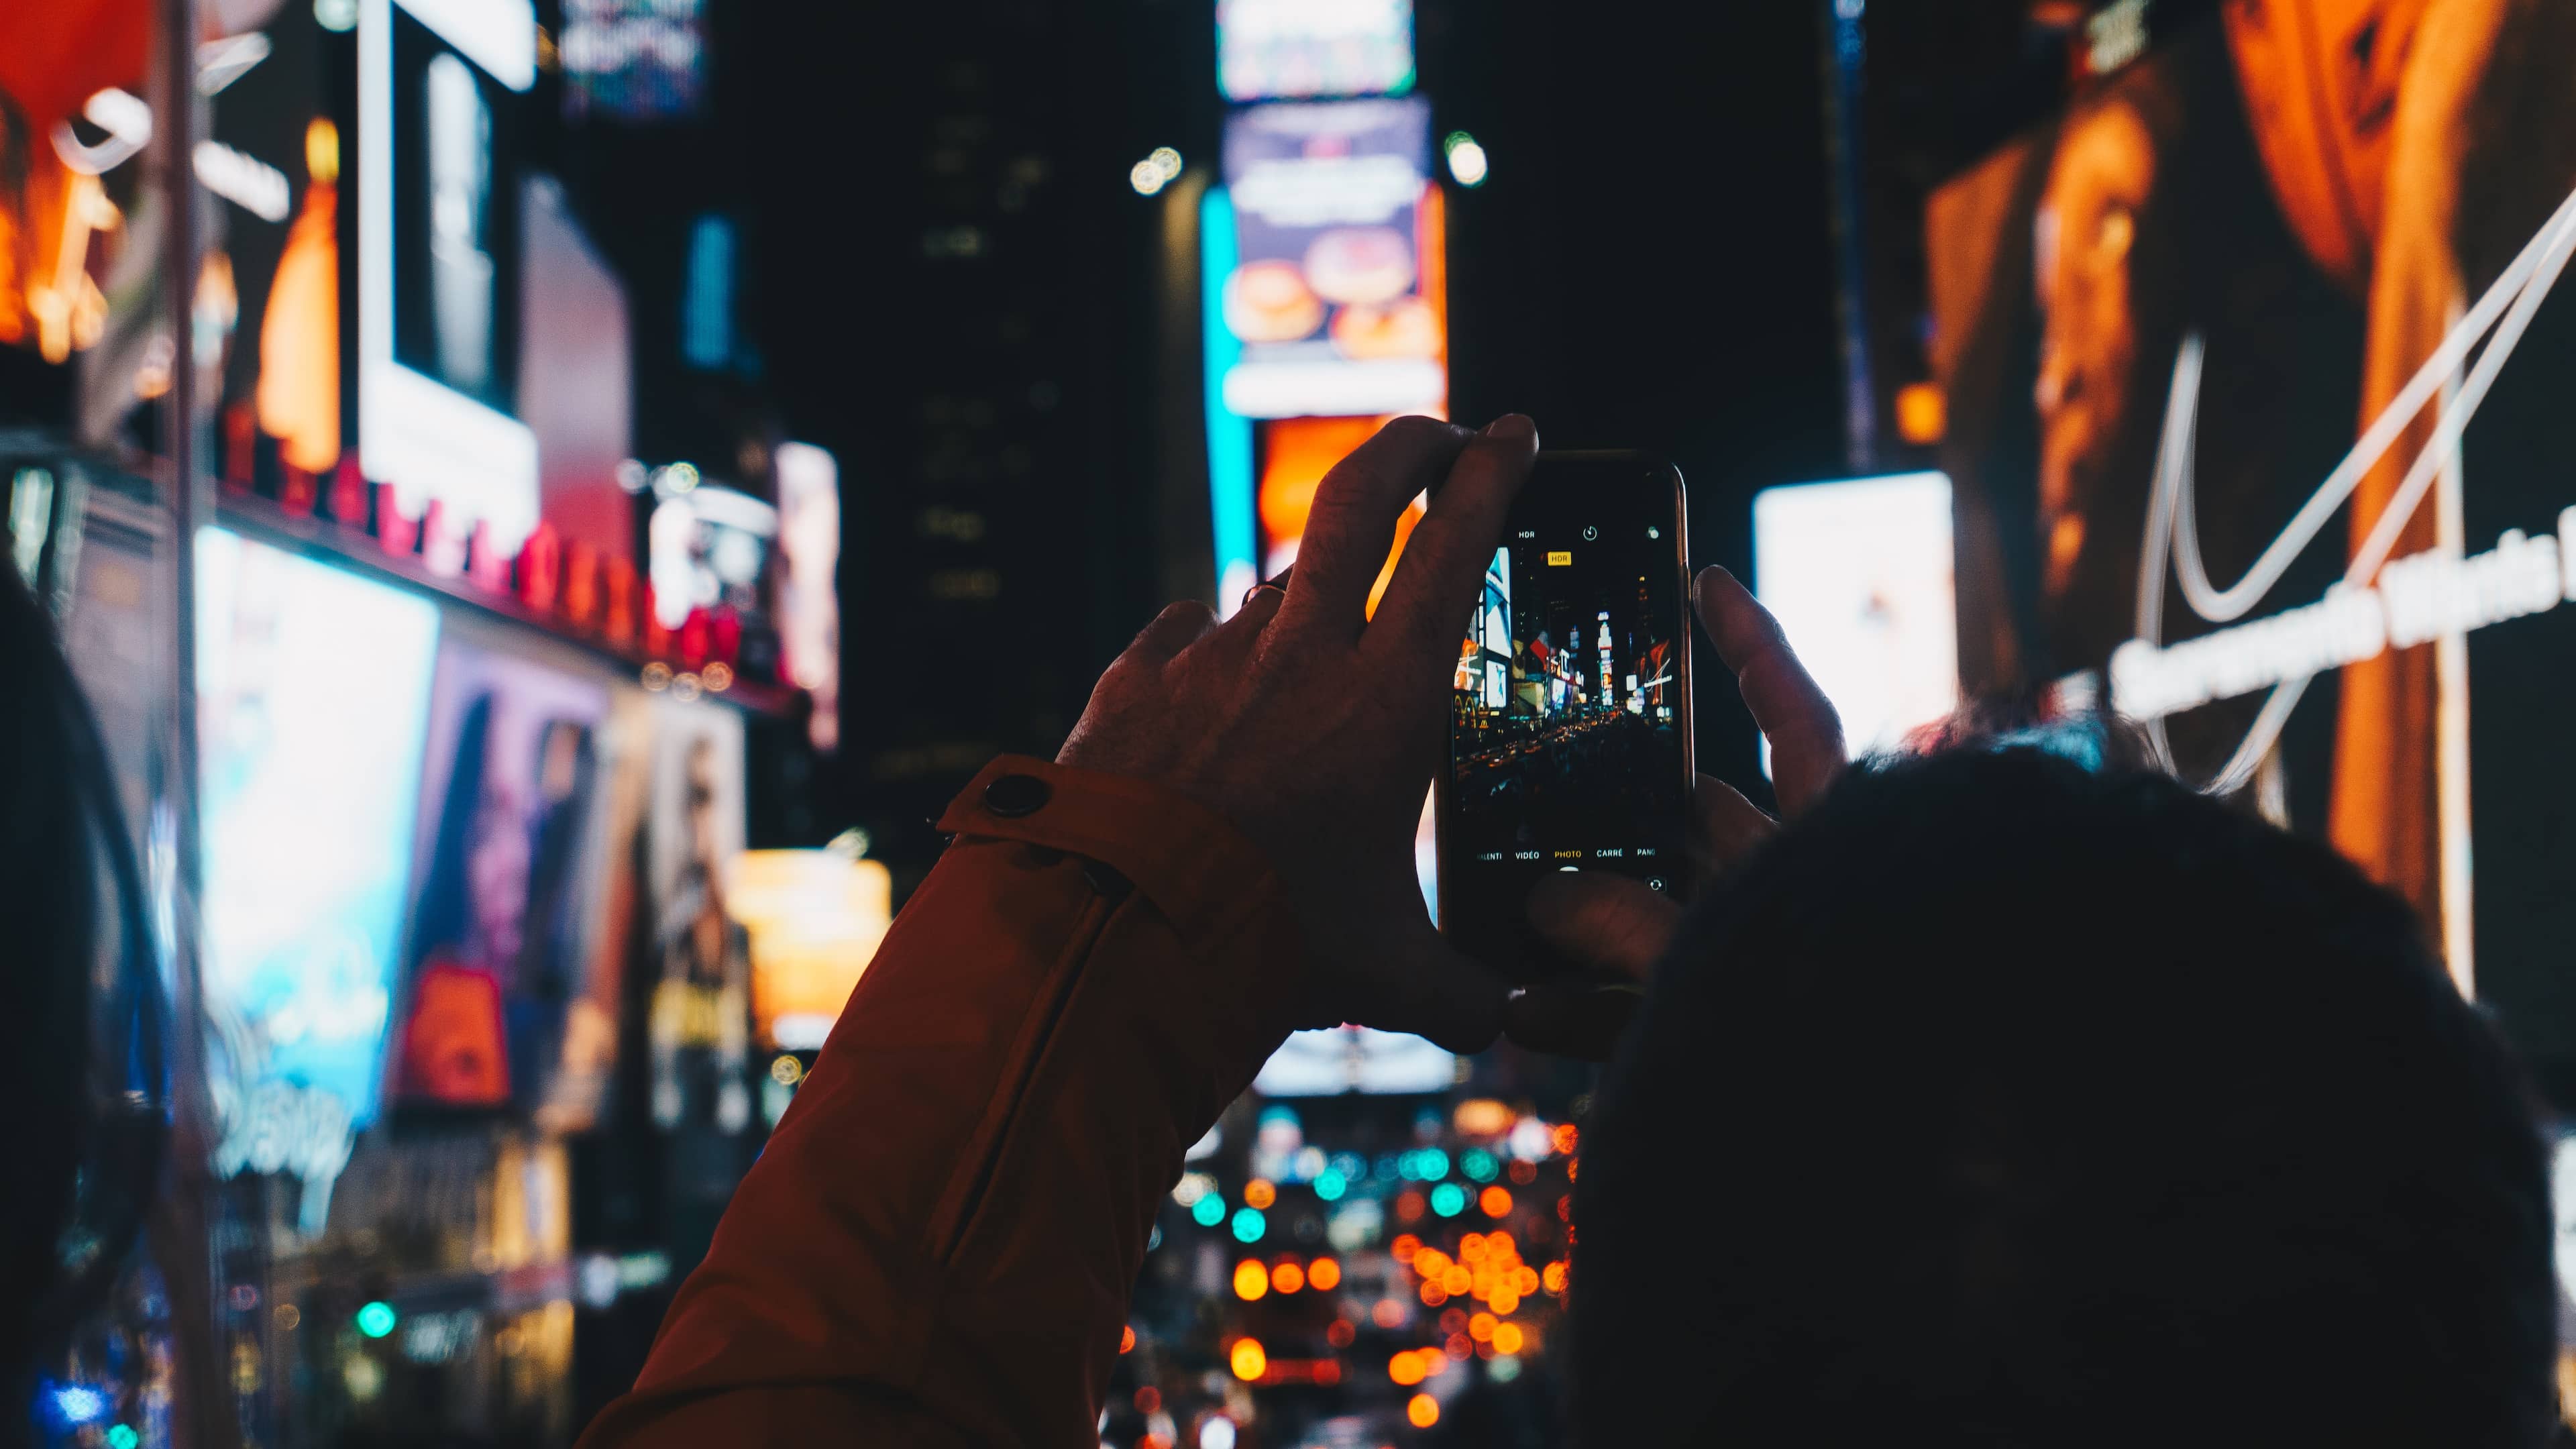 Man uses Apple's Camera app on his iPhone to photograph Times Square in New York